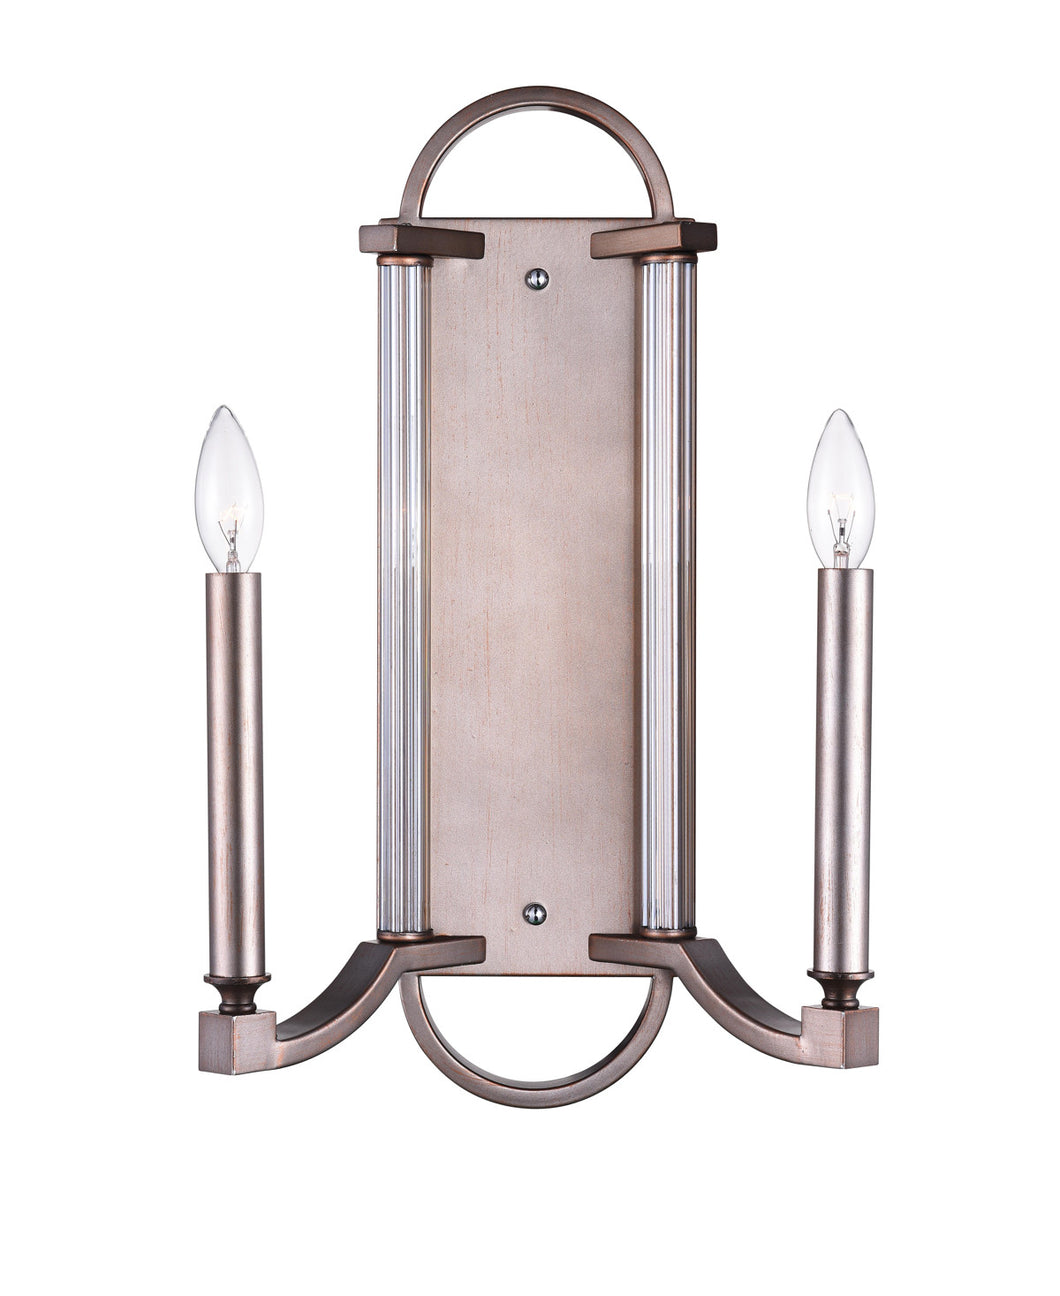 2 Light Wall Sconce with Brownish Silver finish